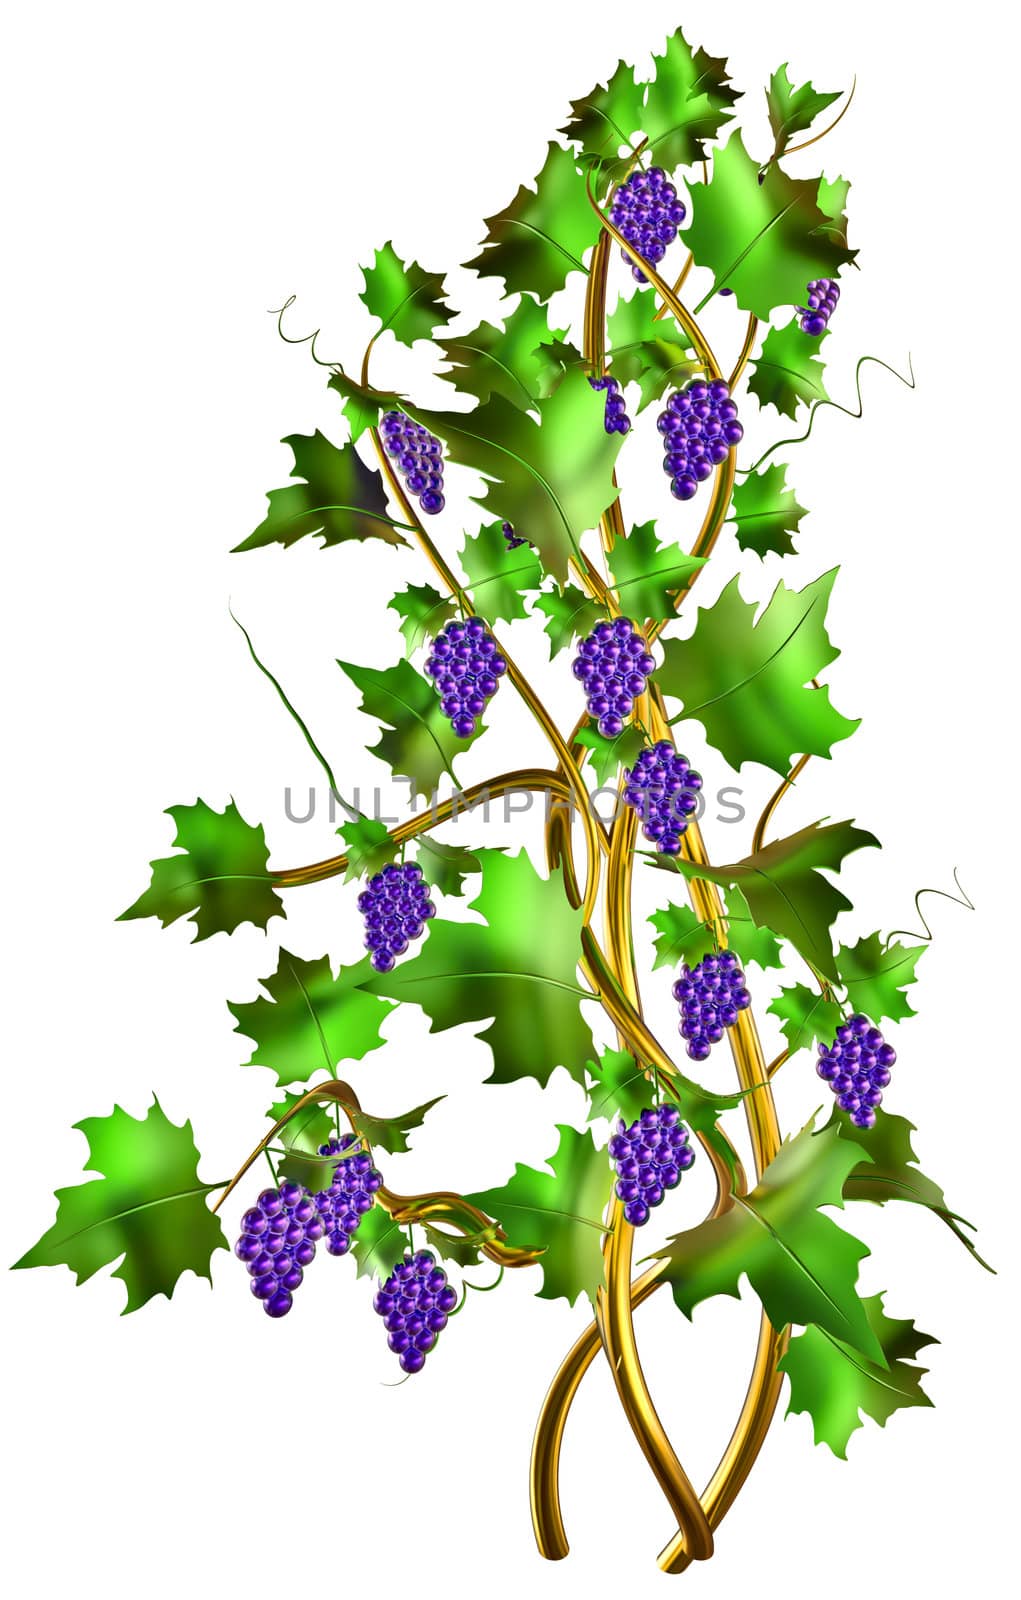 Cabernet shrub with fresh purple blue grapes and green leaves on the vine is one of the world's most widely recognized grapes varieties for winemaking.